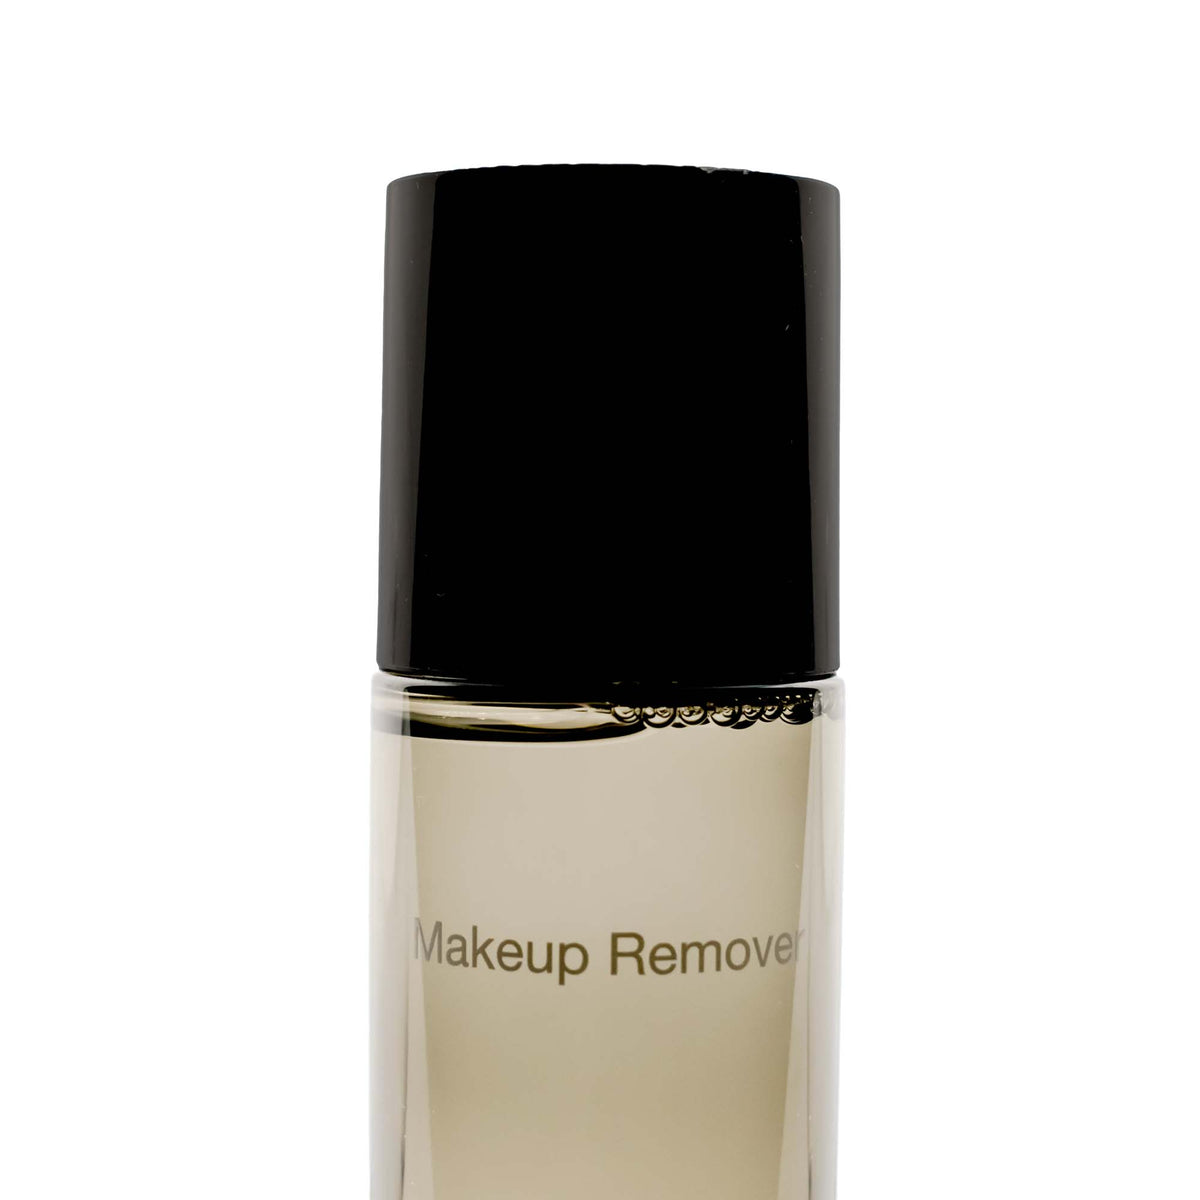 Makeup Remover Solution